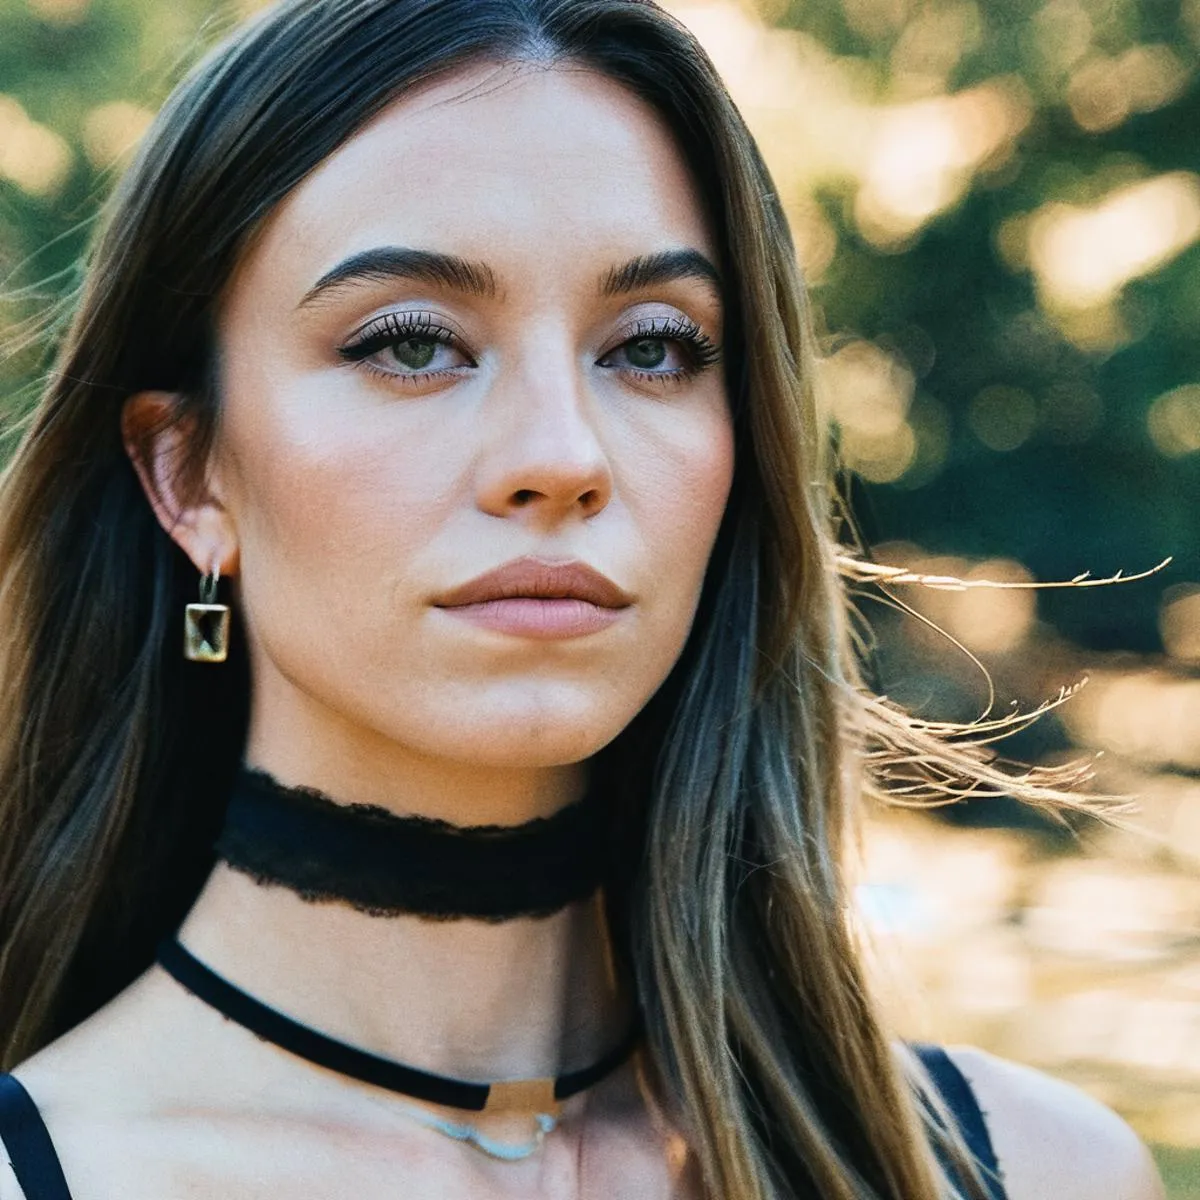 AI generated image of a young woman with long hair wearing a black choker and earrings, outdoors with a blurred background. The image is created using Stable Diffusion.